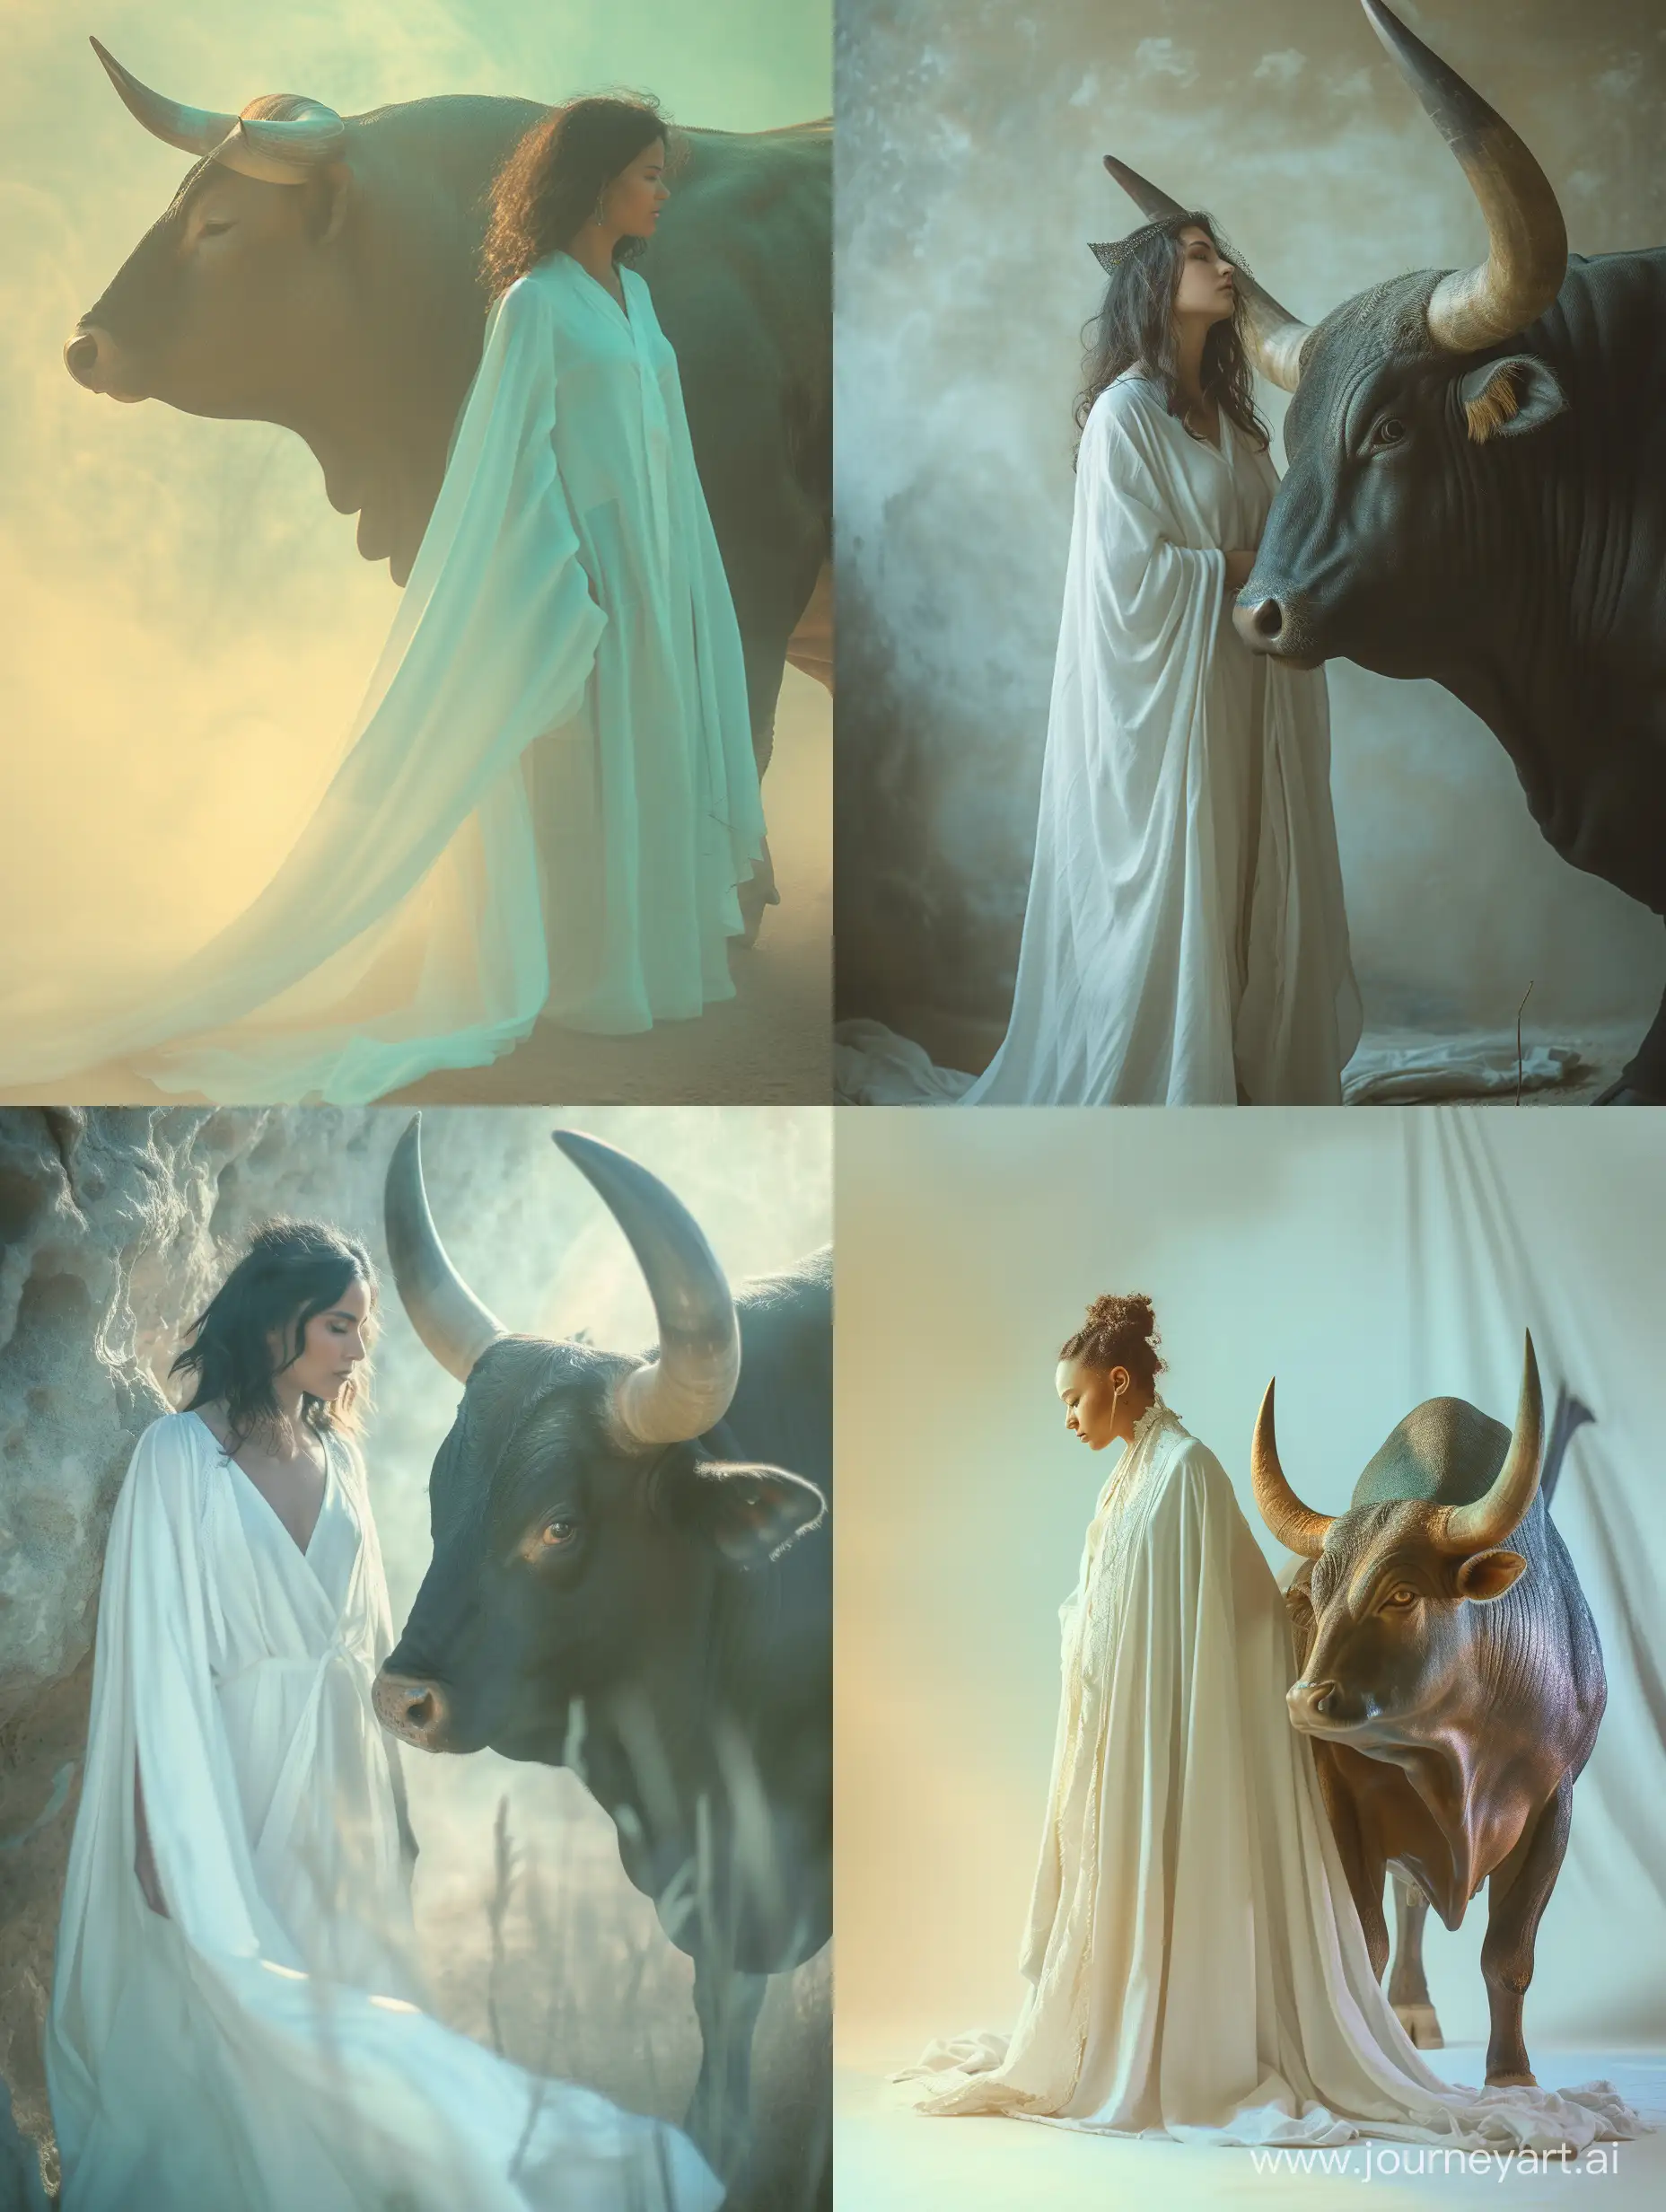 /quick image: A fascinating photograph of a woman dressed in a white robe, standing next to a divine horned bull. The woman is captured in a full-length photograph, with her flowing robe creating a sense of movement and grace. The bull is shown in profile, with its majestic horns and muscles creating a feeling of power and divinity. The colors are muted and dreamlike, with low saturation adding to the ethereal, otherworldly atmosphere of the photograph. The lighting is soft and diffuse, with a soft glow that illuminates the woman's face and emphasizes her beauty and the divine nature of the bull. The background is blurred, with a shallow depth of field that creates a sense of depth and perspective. The composition is balanced, with the woman and the bull creating a harmonious and serene scene. The image has a mystical and spiritual quality, with the white robe and divine bull symbolizing purity and transcendence. It is perfect for those who appreciate the beauty and wonder of mythology and spirituality. 4K